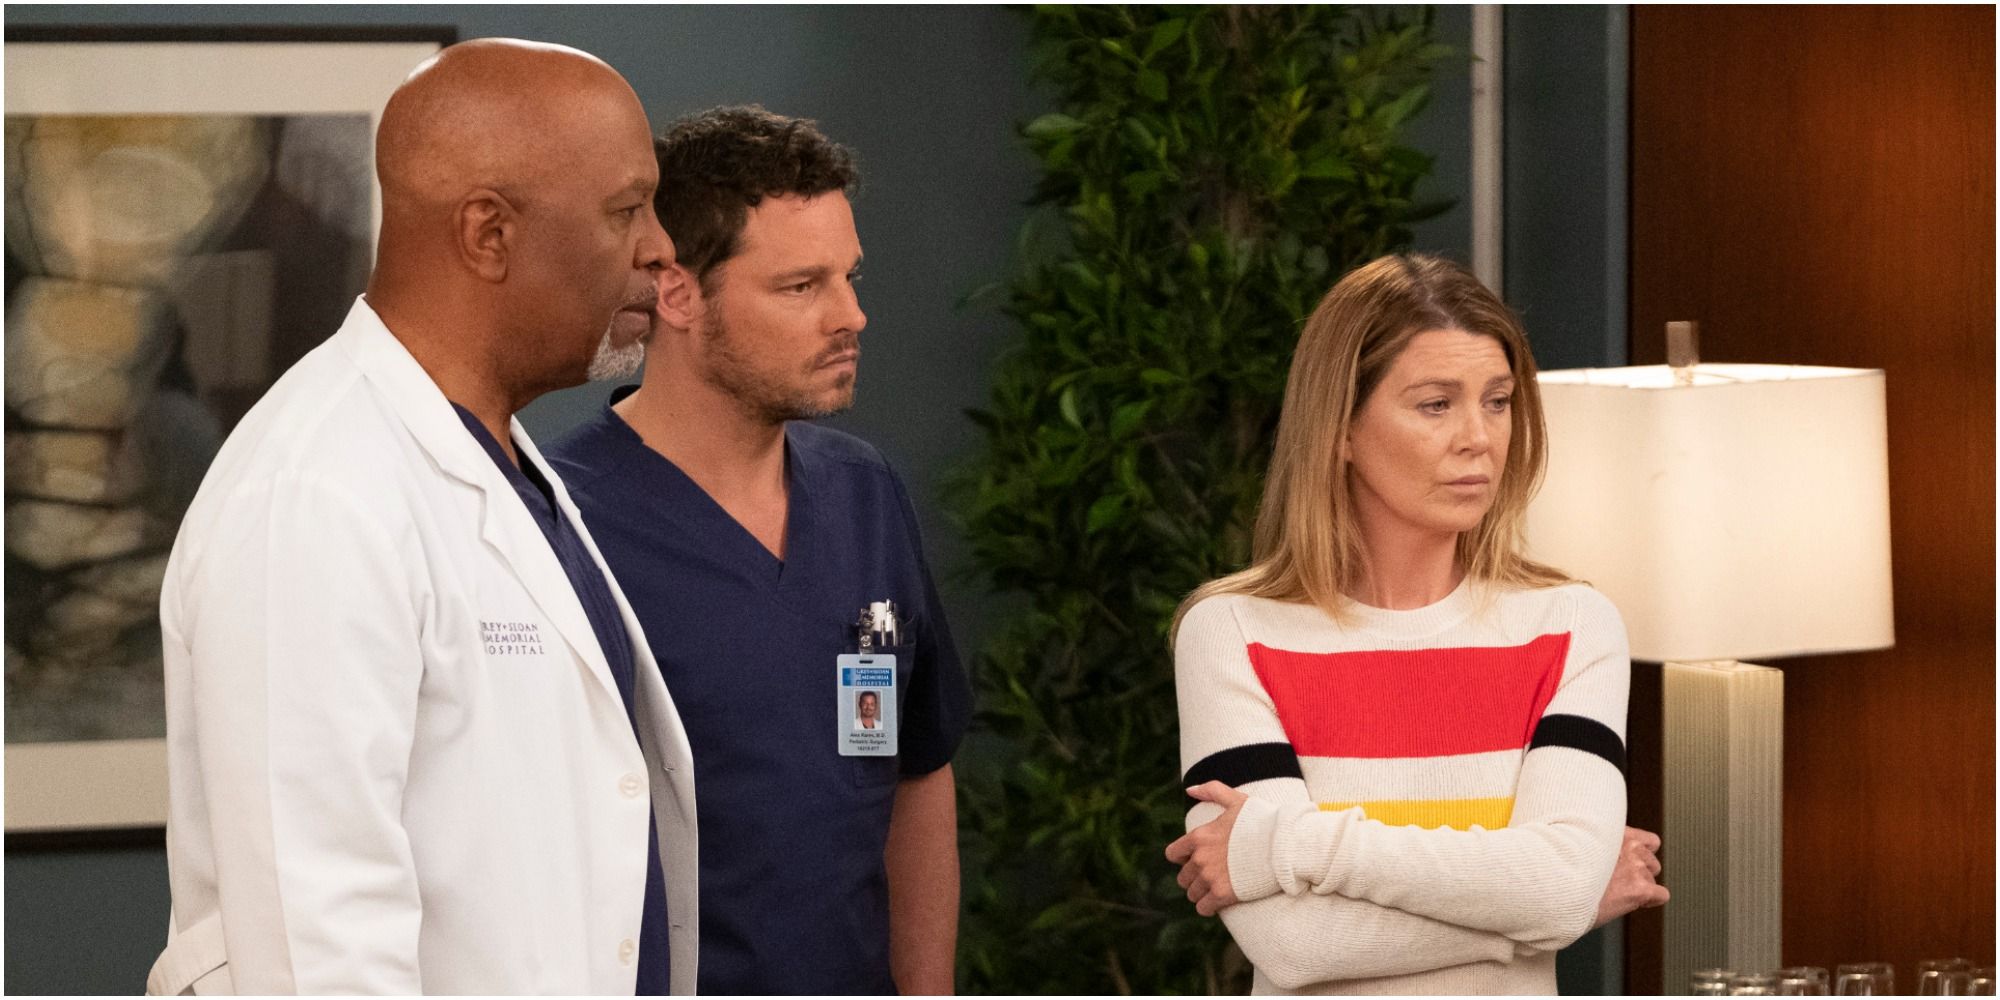 Alex, Rochard and Meredith stood talking together